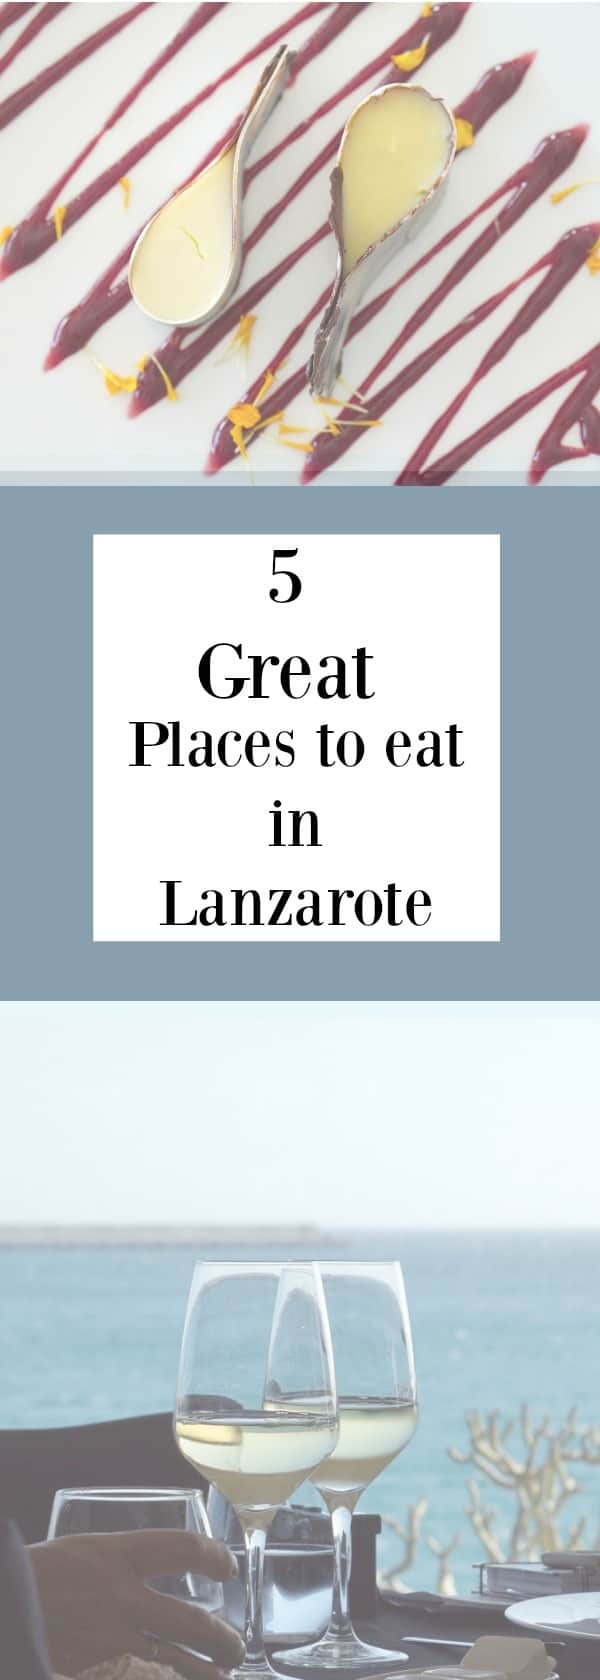 Where to eat in Lanzarote here are 5 great places to eat that will offer unique experiences on the Island 1